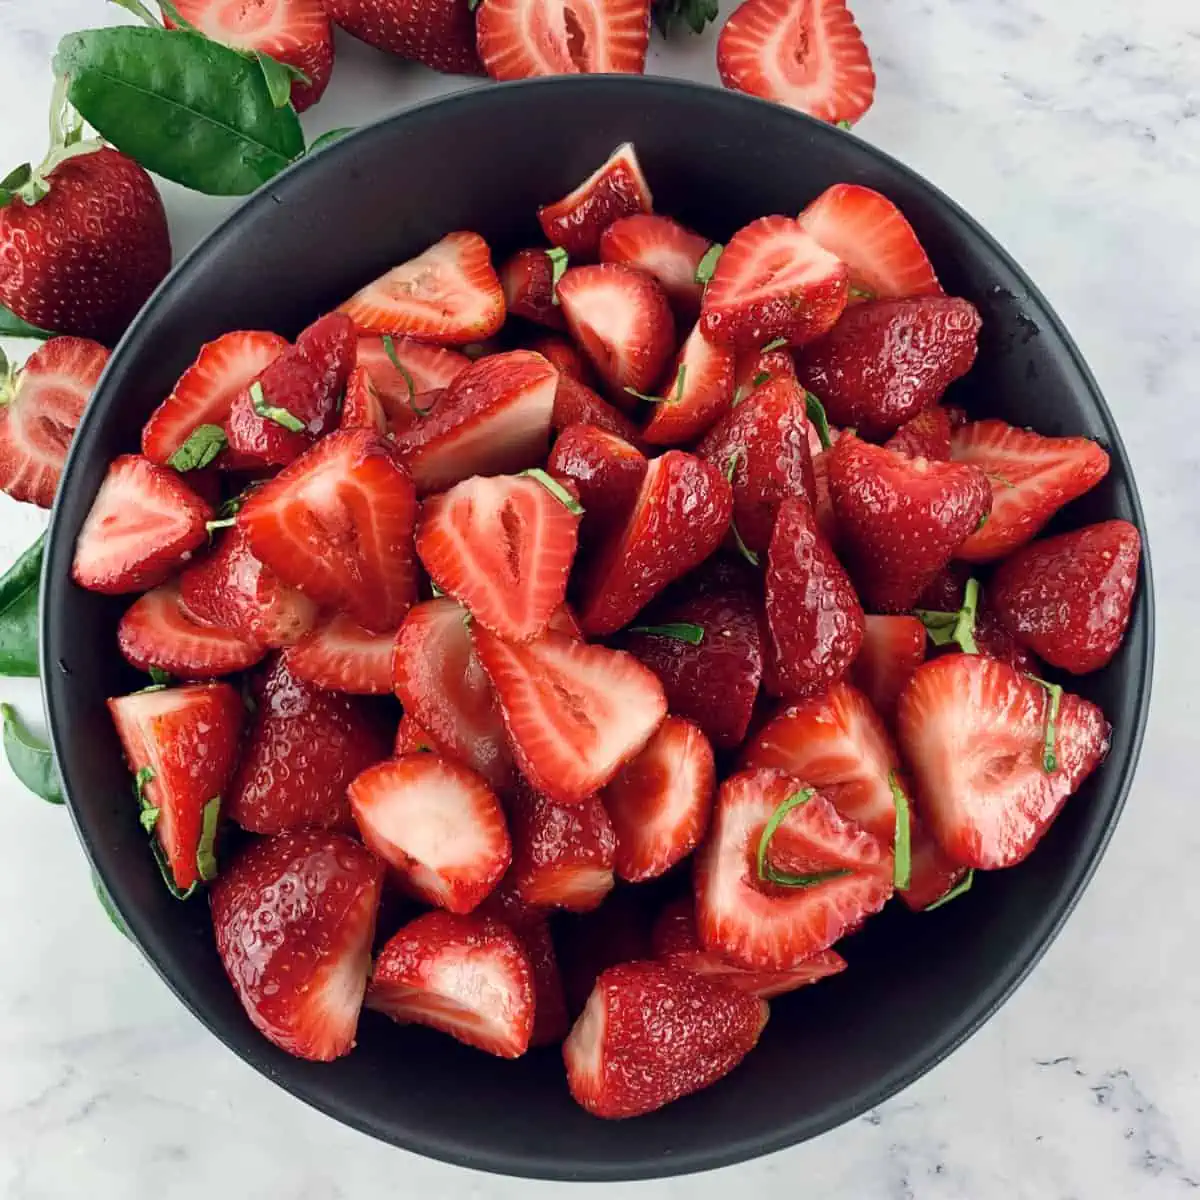 Strawberries and lime fruit salad in a black bowl with strawberries and lime leaves scattered around.